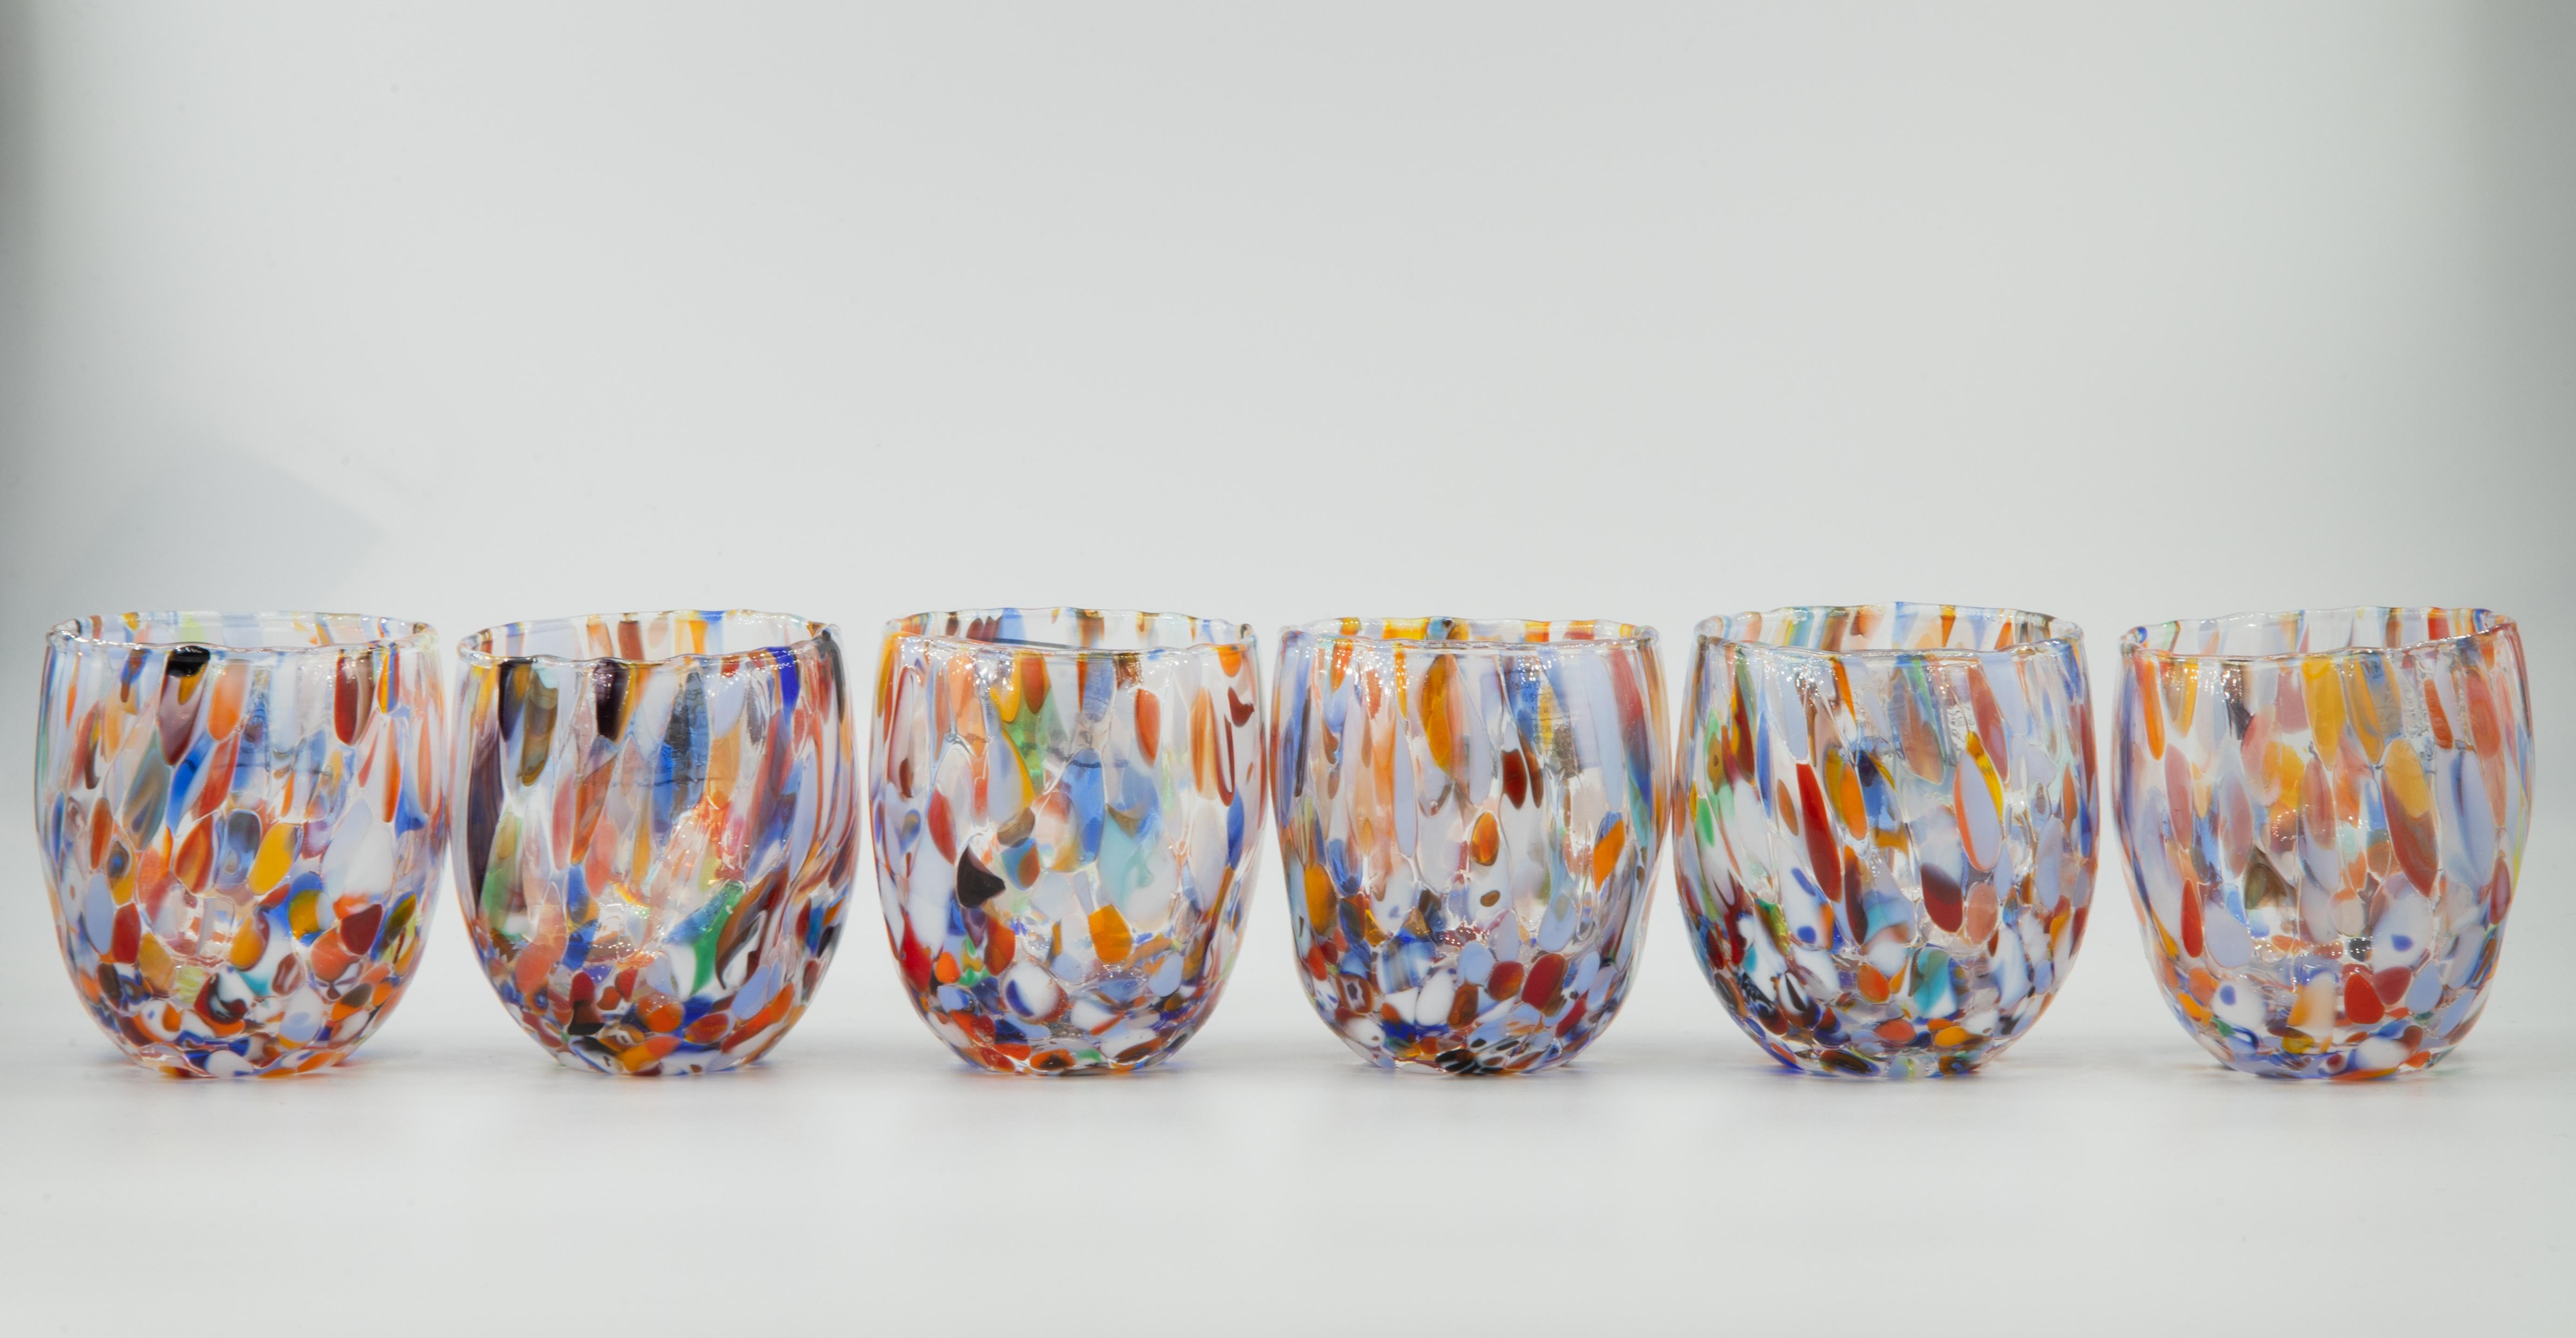  Buenos Aires, set of 6 Murano shot glasses color 